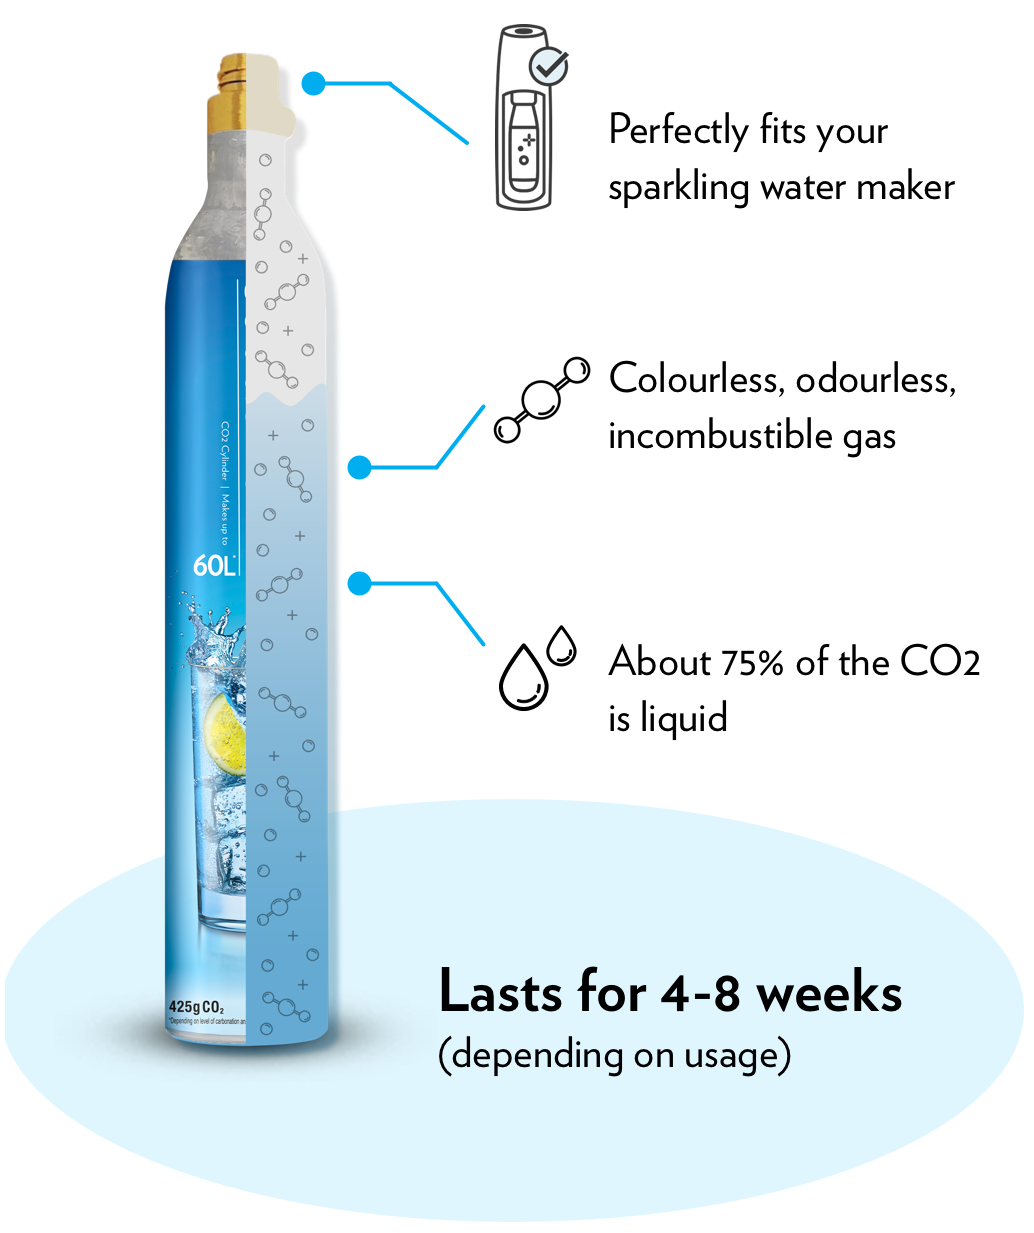 Everything You Need to Know About Co2 Gas Cylinders – SodaStream Australia